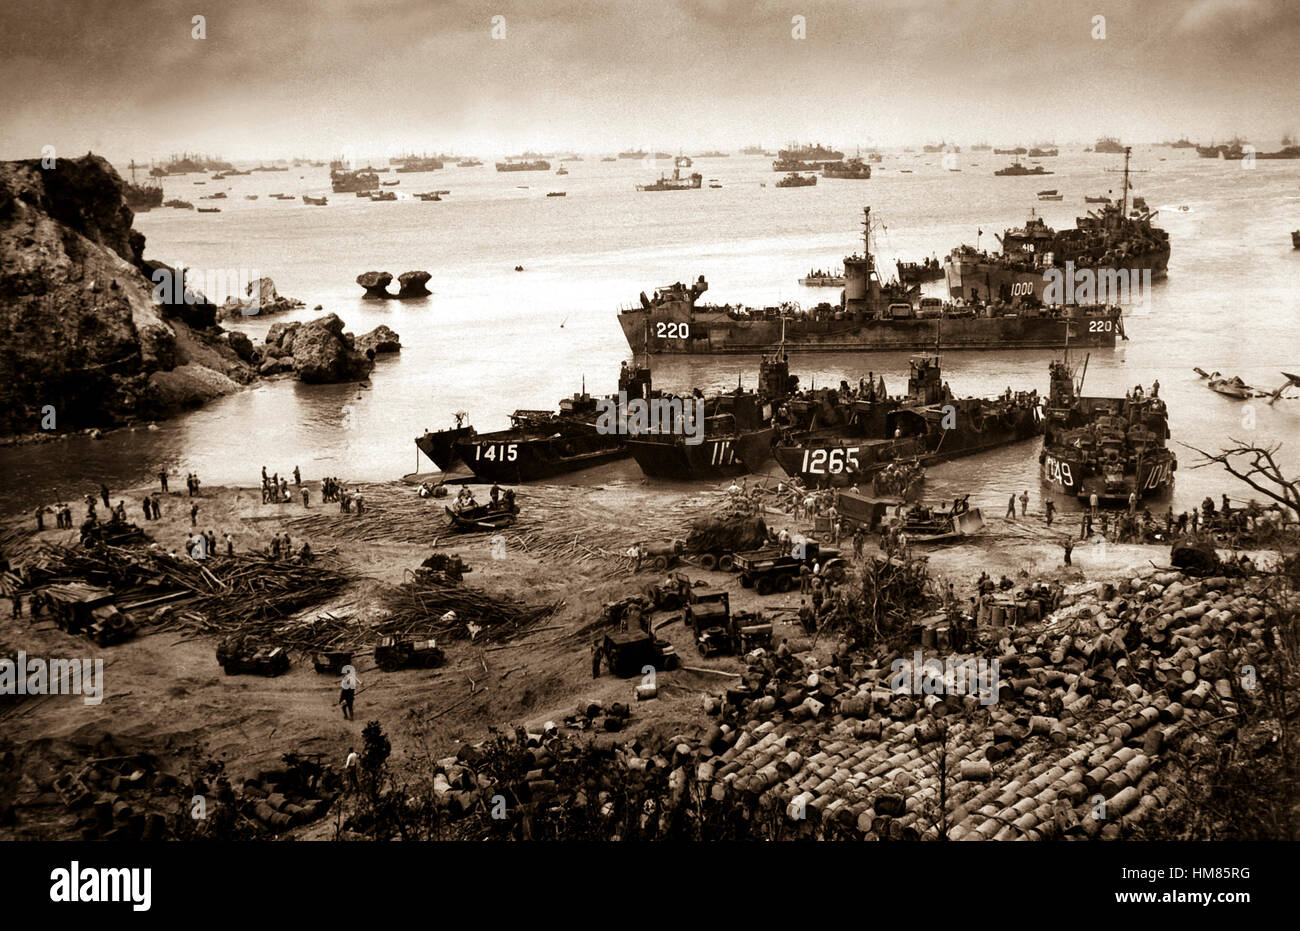 A formidable task force carves out a beachhead, about 350 miles from the Japanese mainland.  Landing craft of all kinds blacken the sea out to the horizon, where stand the battlewagons, cruisers and destroyers.  Okinawa, April 13, 1945.  (Coast Guard) NARA FILE #:  026-G-4426 WAR & CONFLICT BOOK #:  1226 Stock Photo